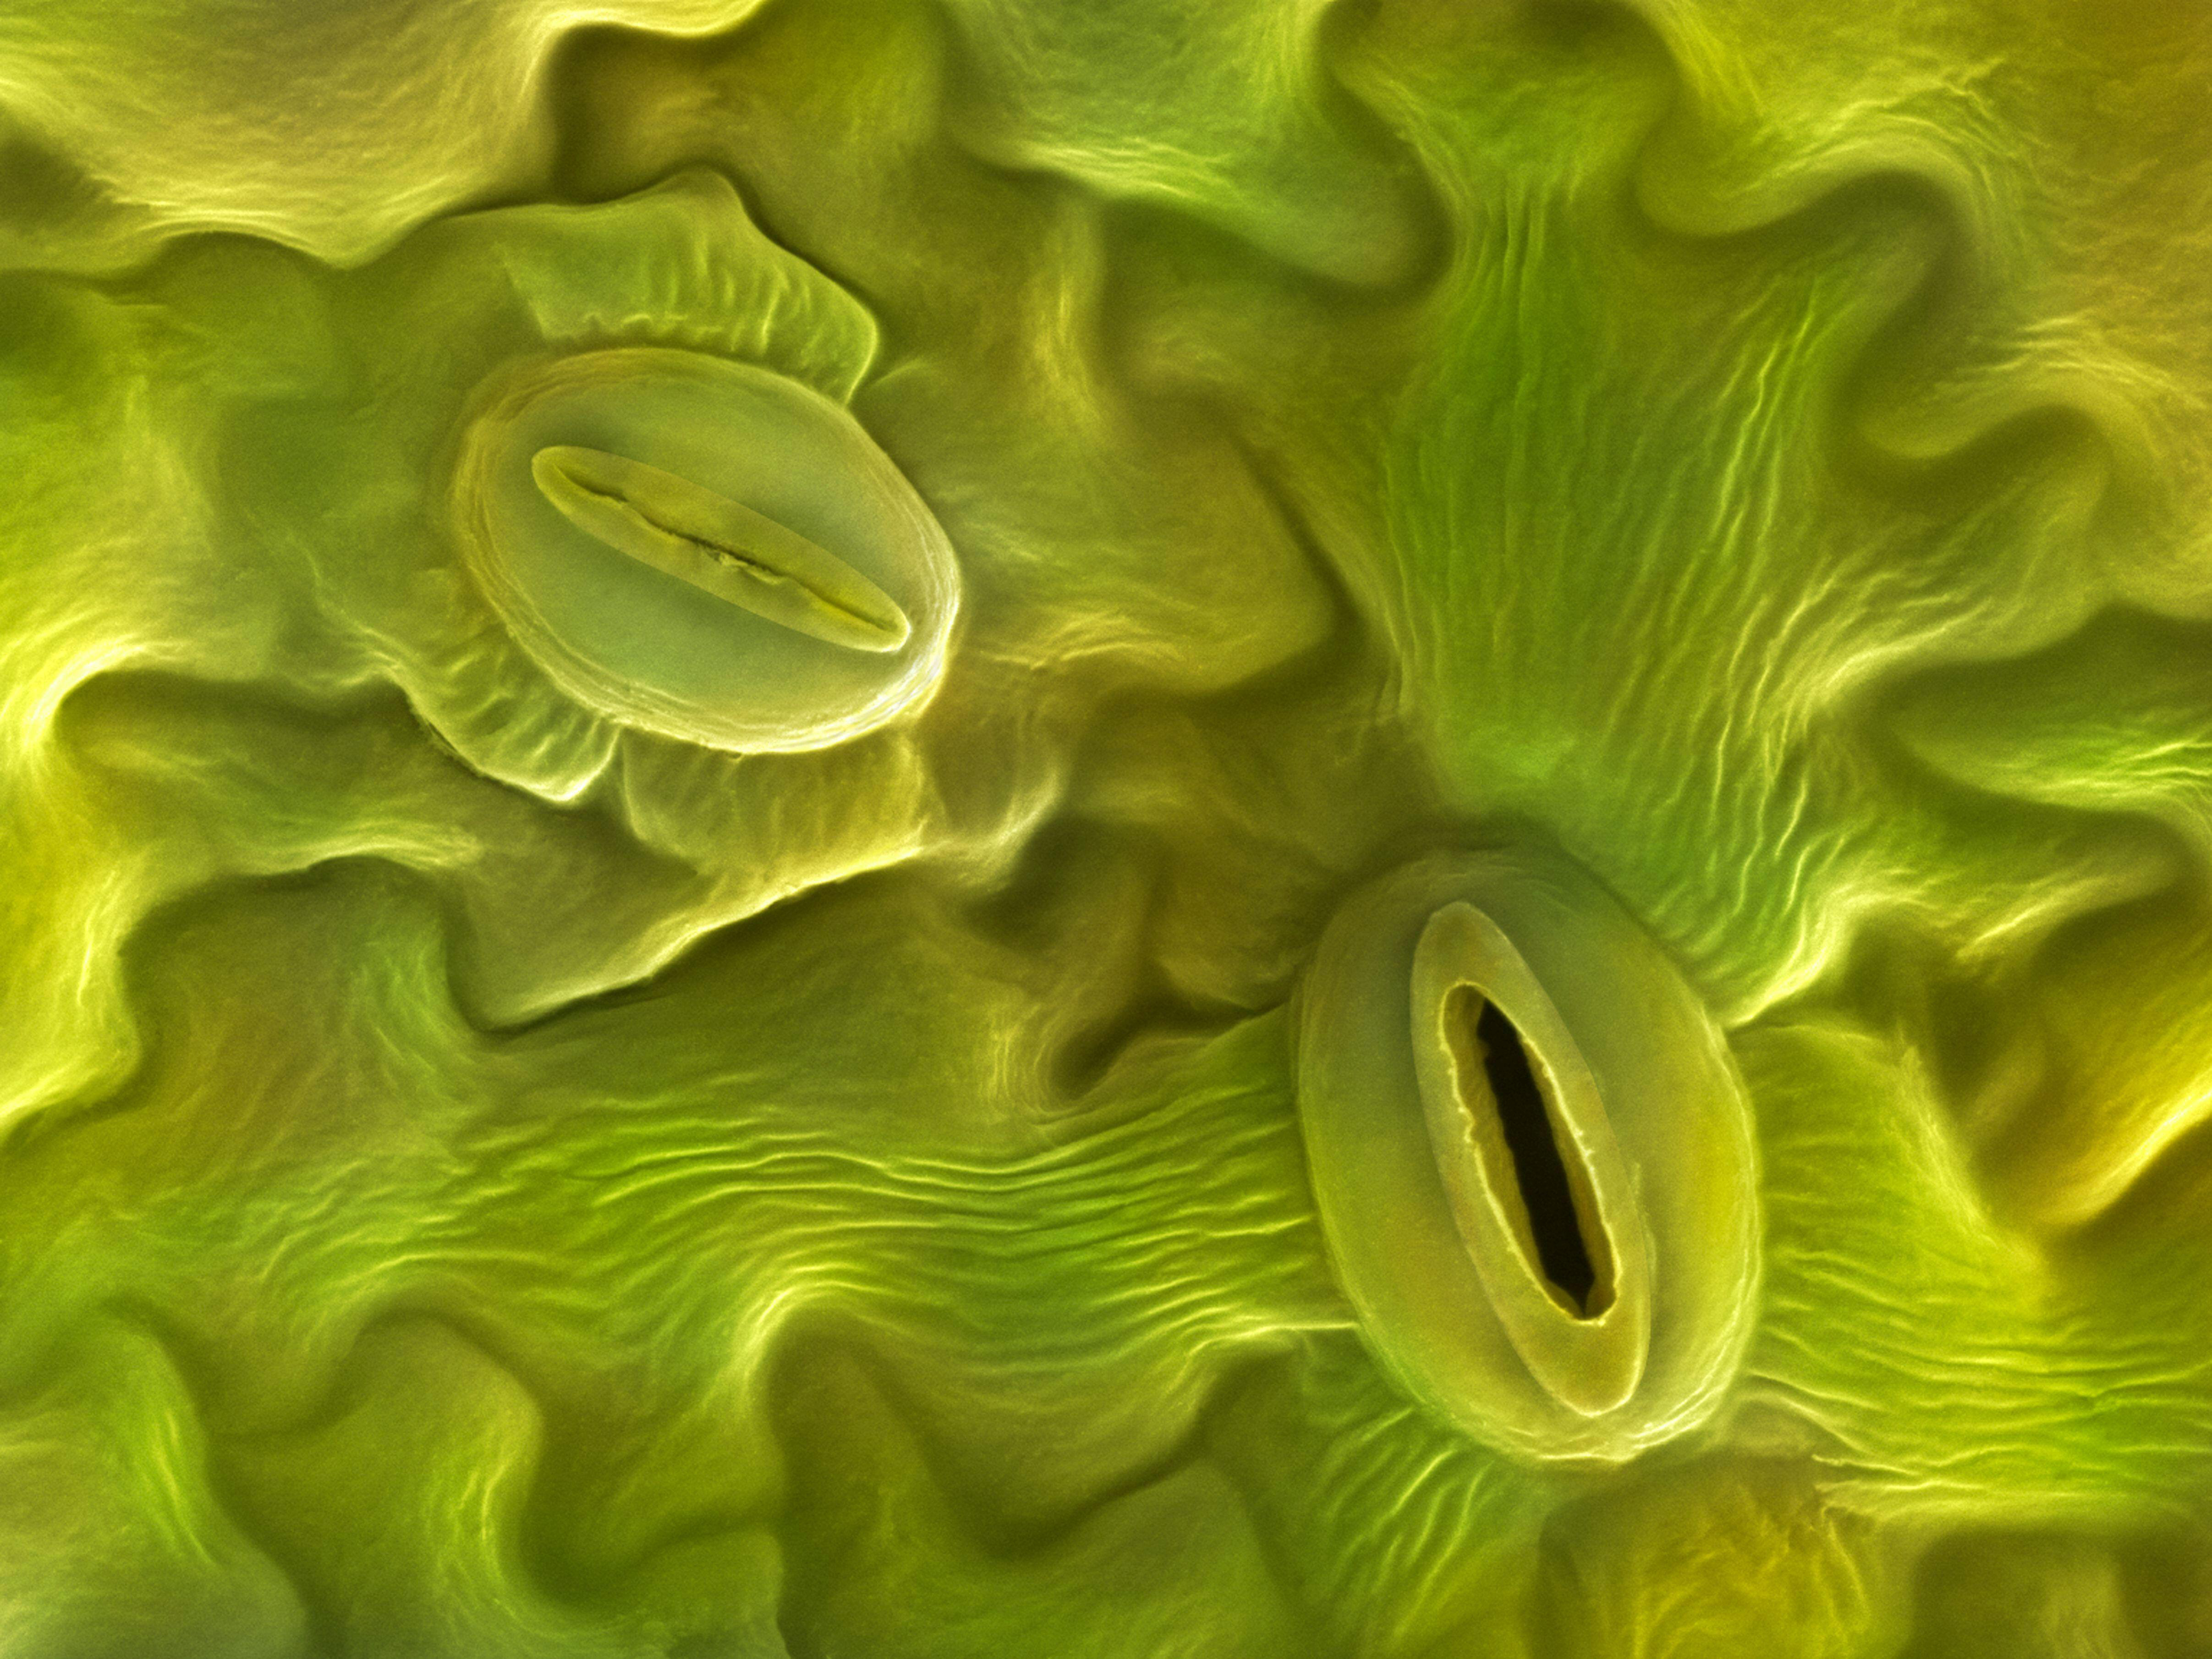 Open and closed stomata on a lavender leaf (Lavendula dentata), coloured scanning electron micrograph (SEM). Stomata are pores that open and close in